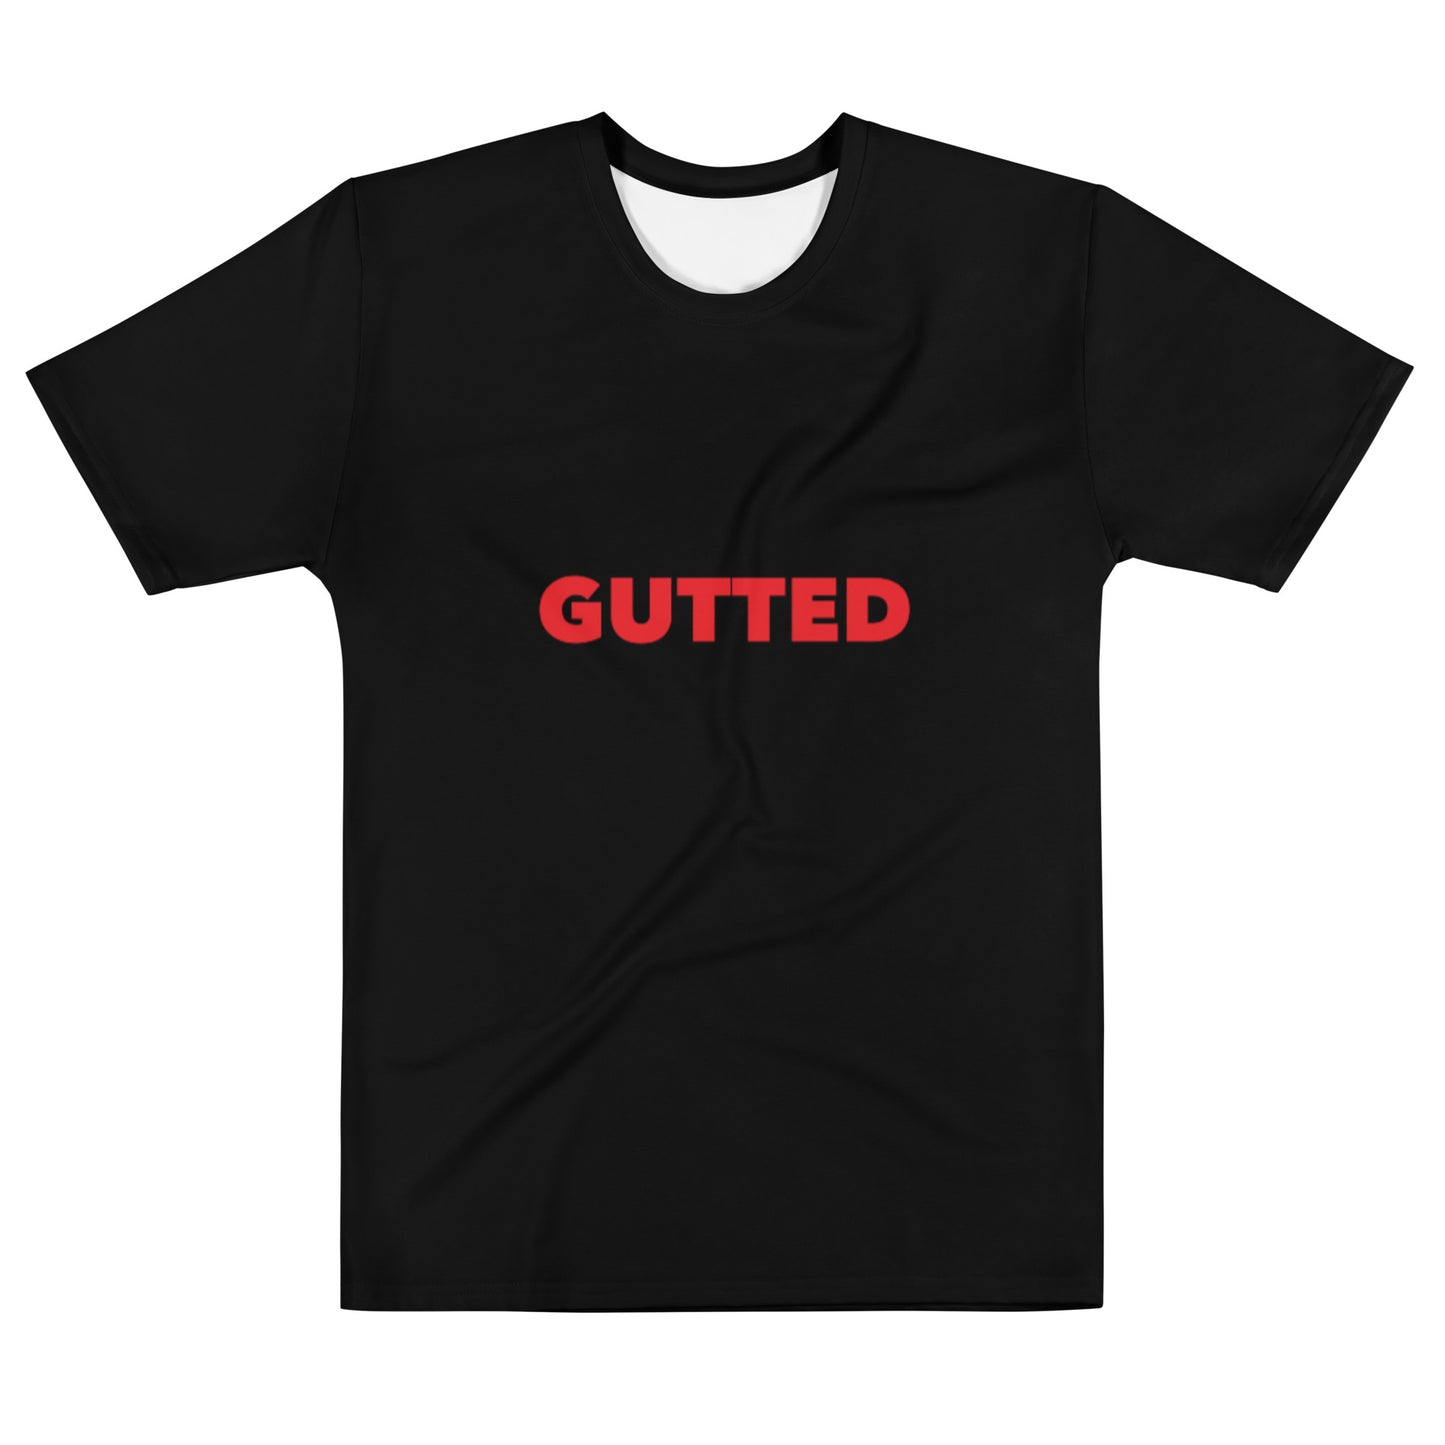 Gutted - Sustainably Made Men's Short Sleeve Tee